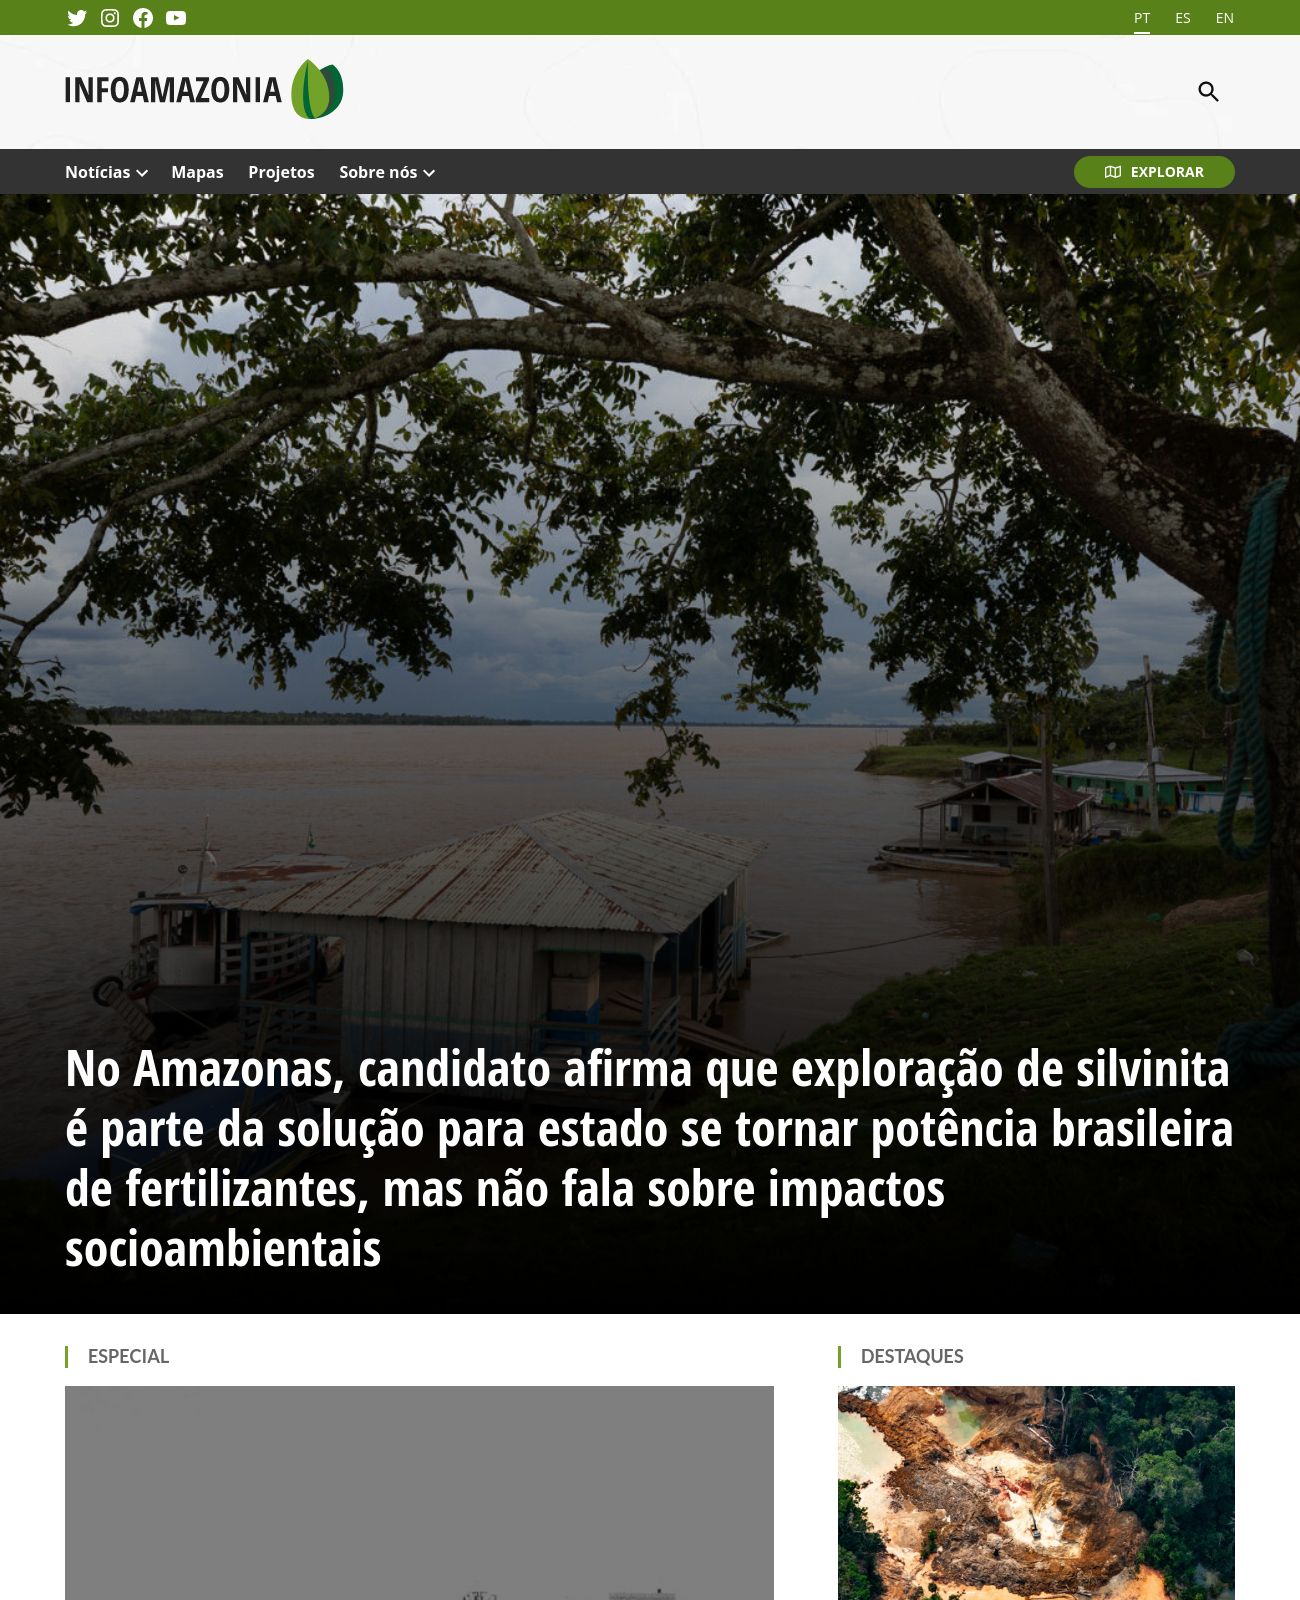 InfoAmazonia at 2022-09-19 08:56:24-03:00 local time